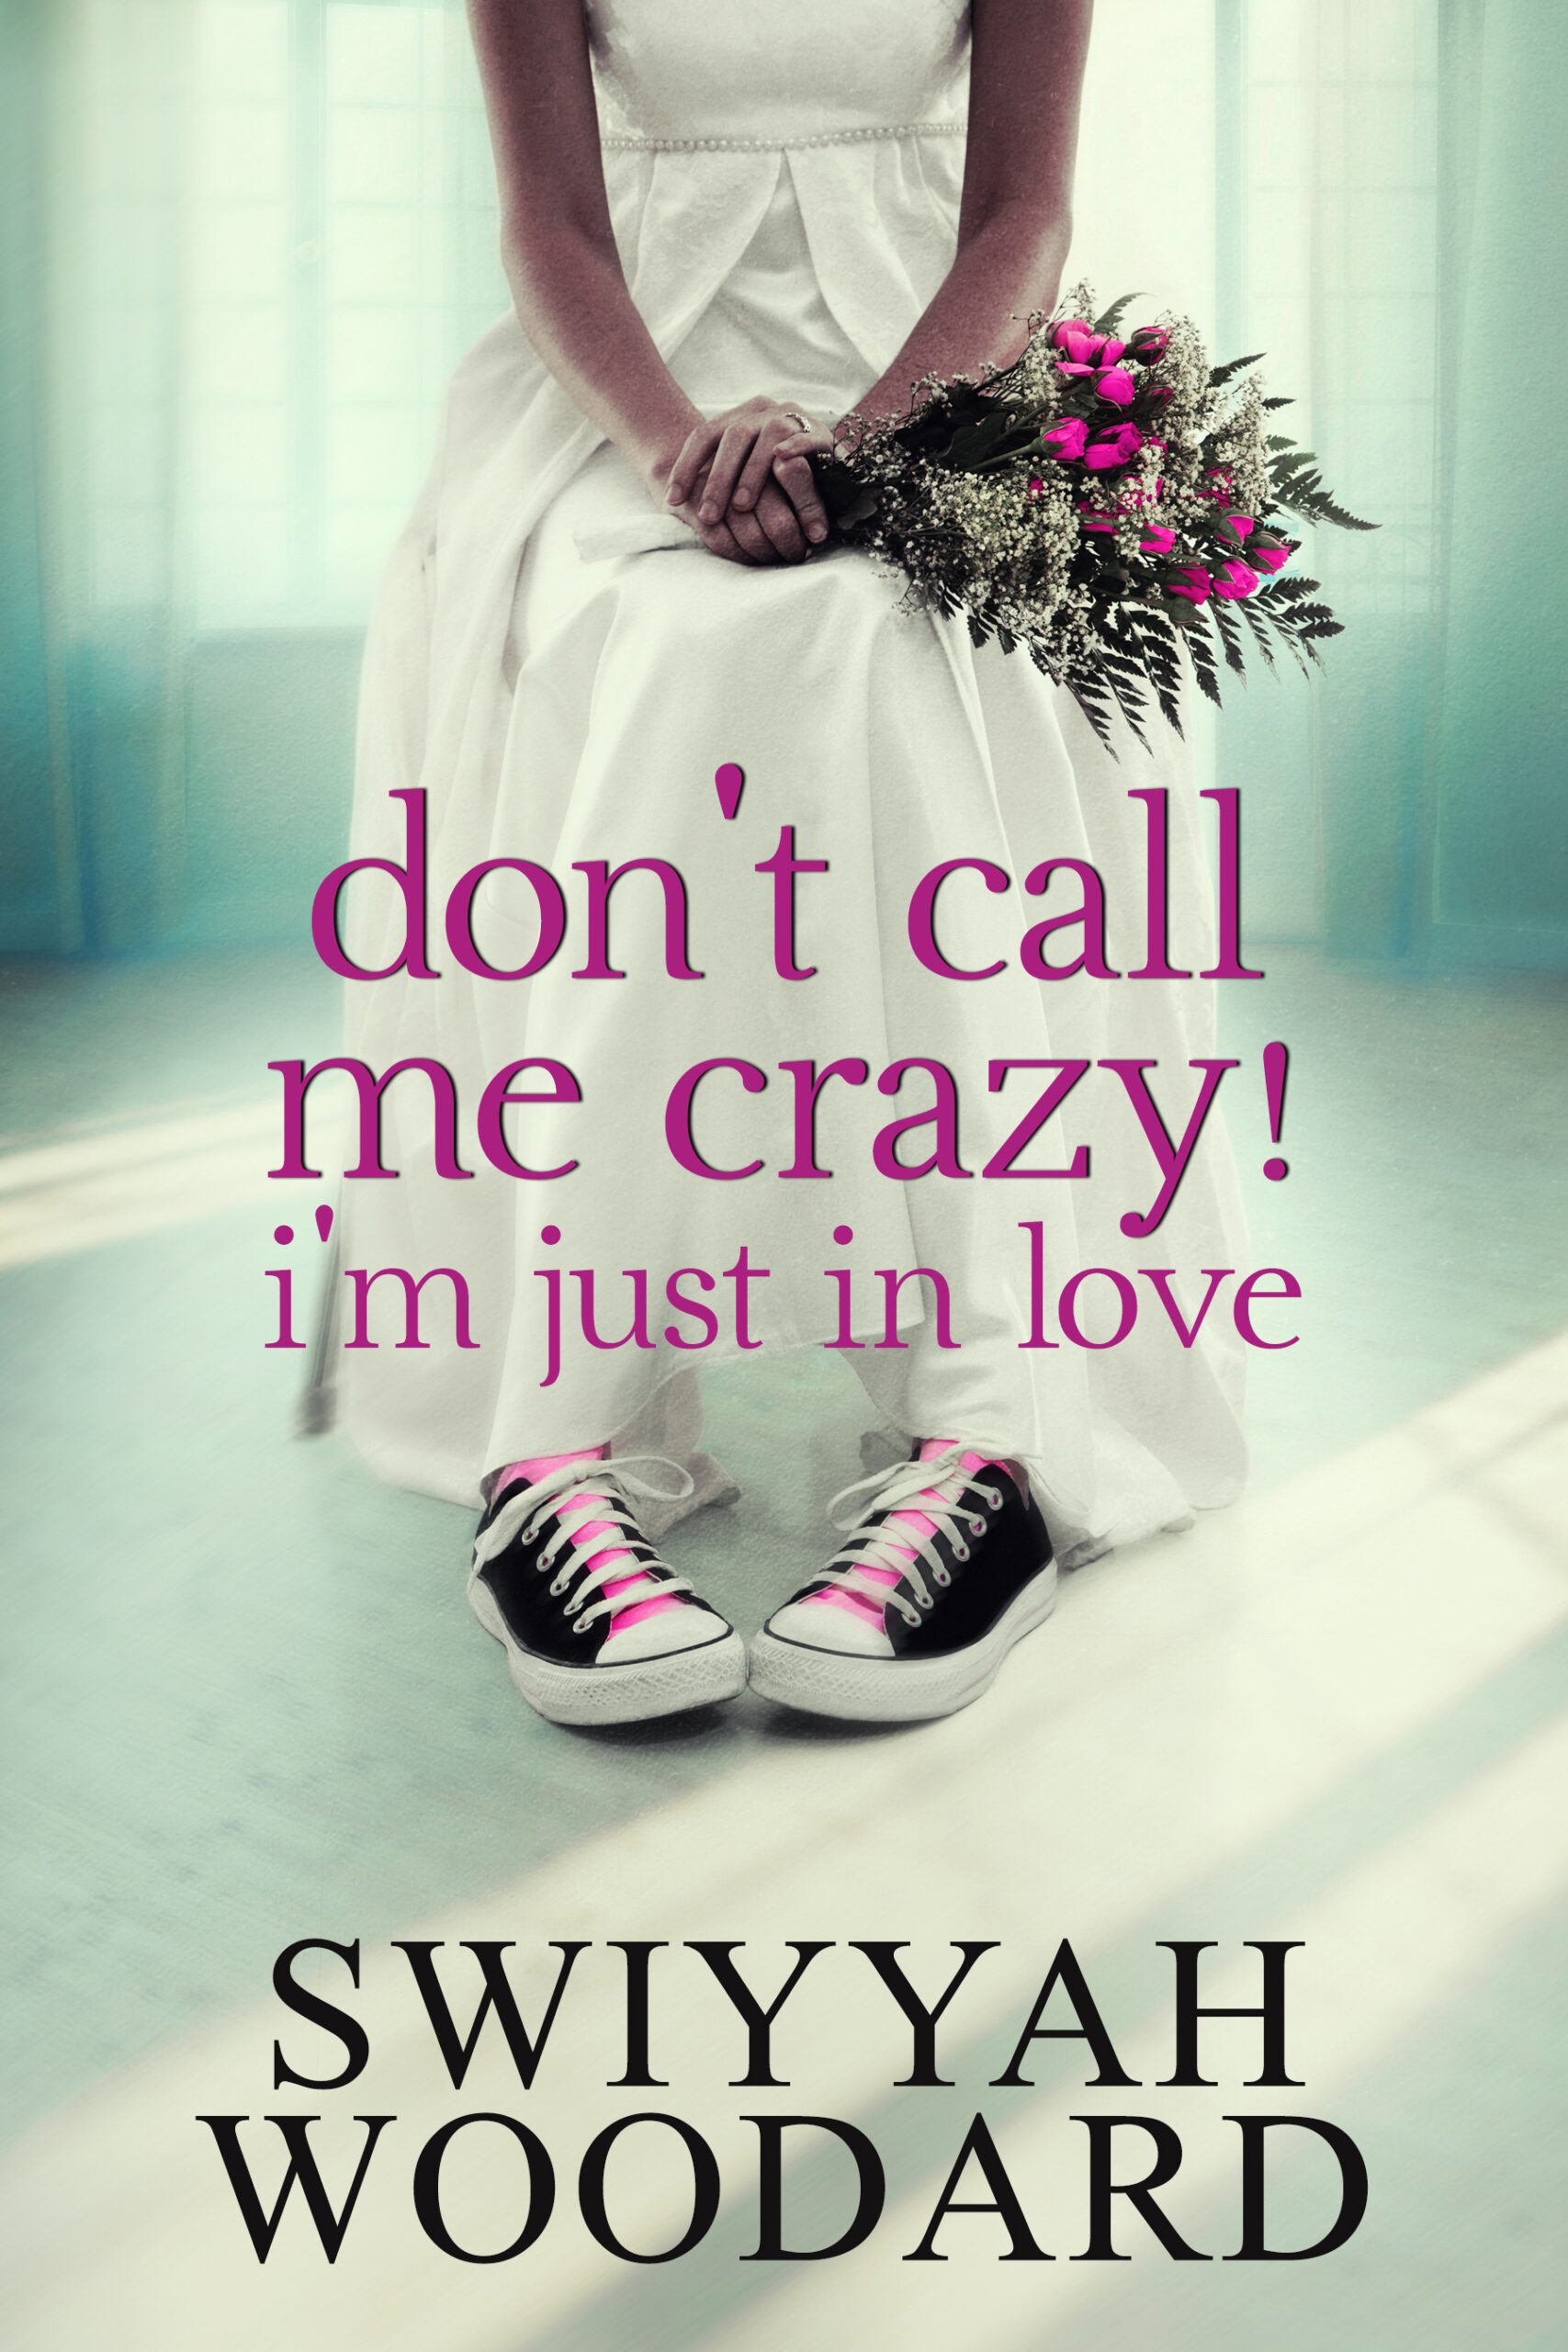 FREE: Don’t call me crazy! I’m just in love by Swiyyah Woodard